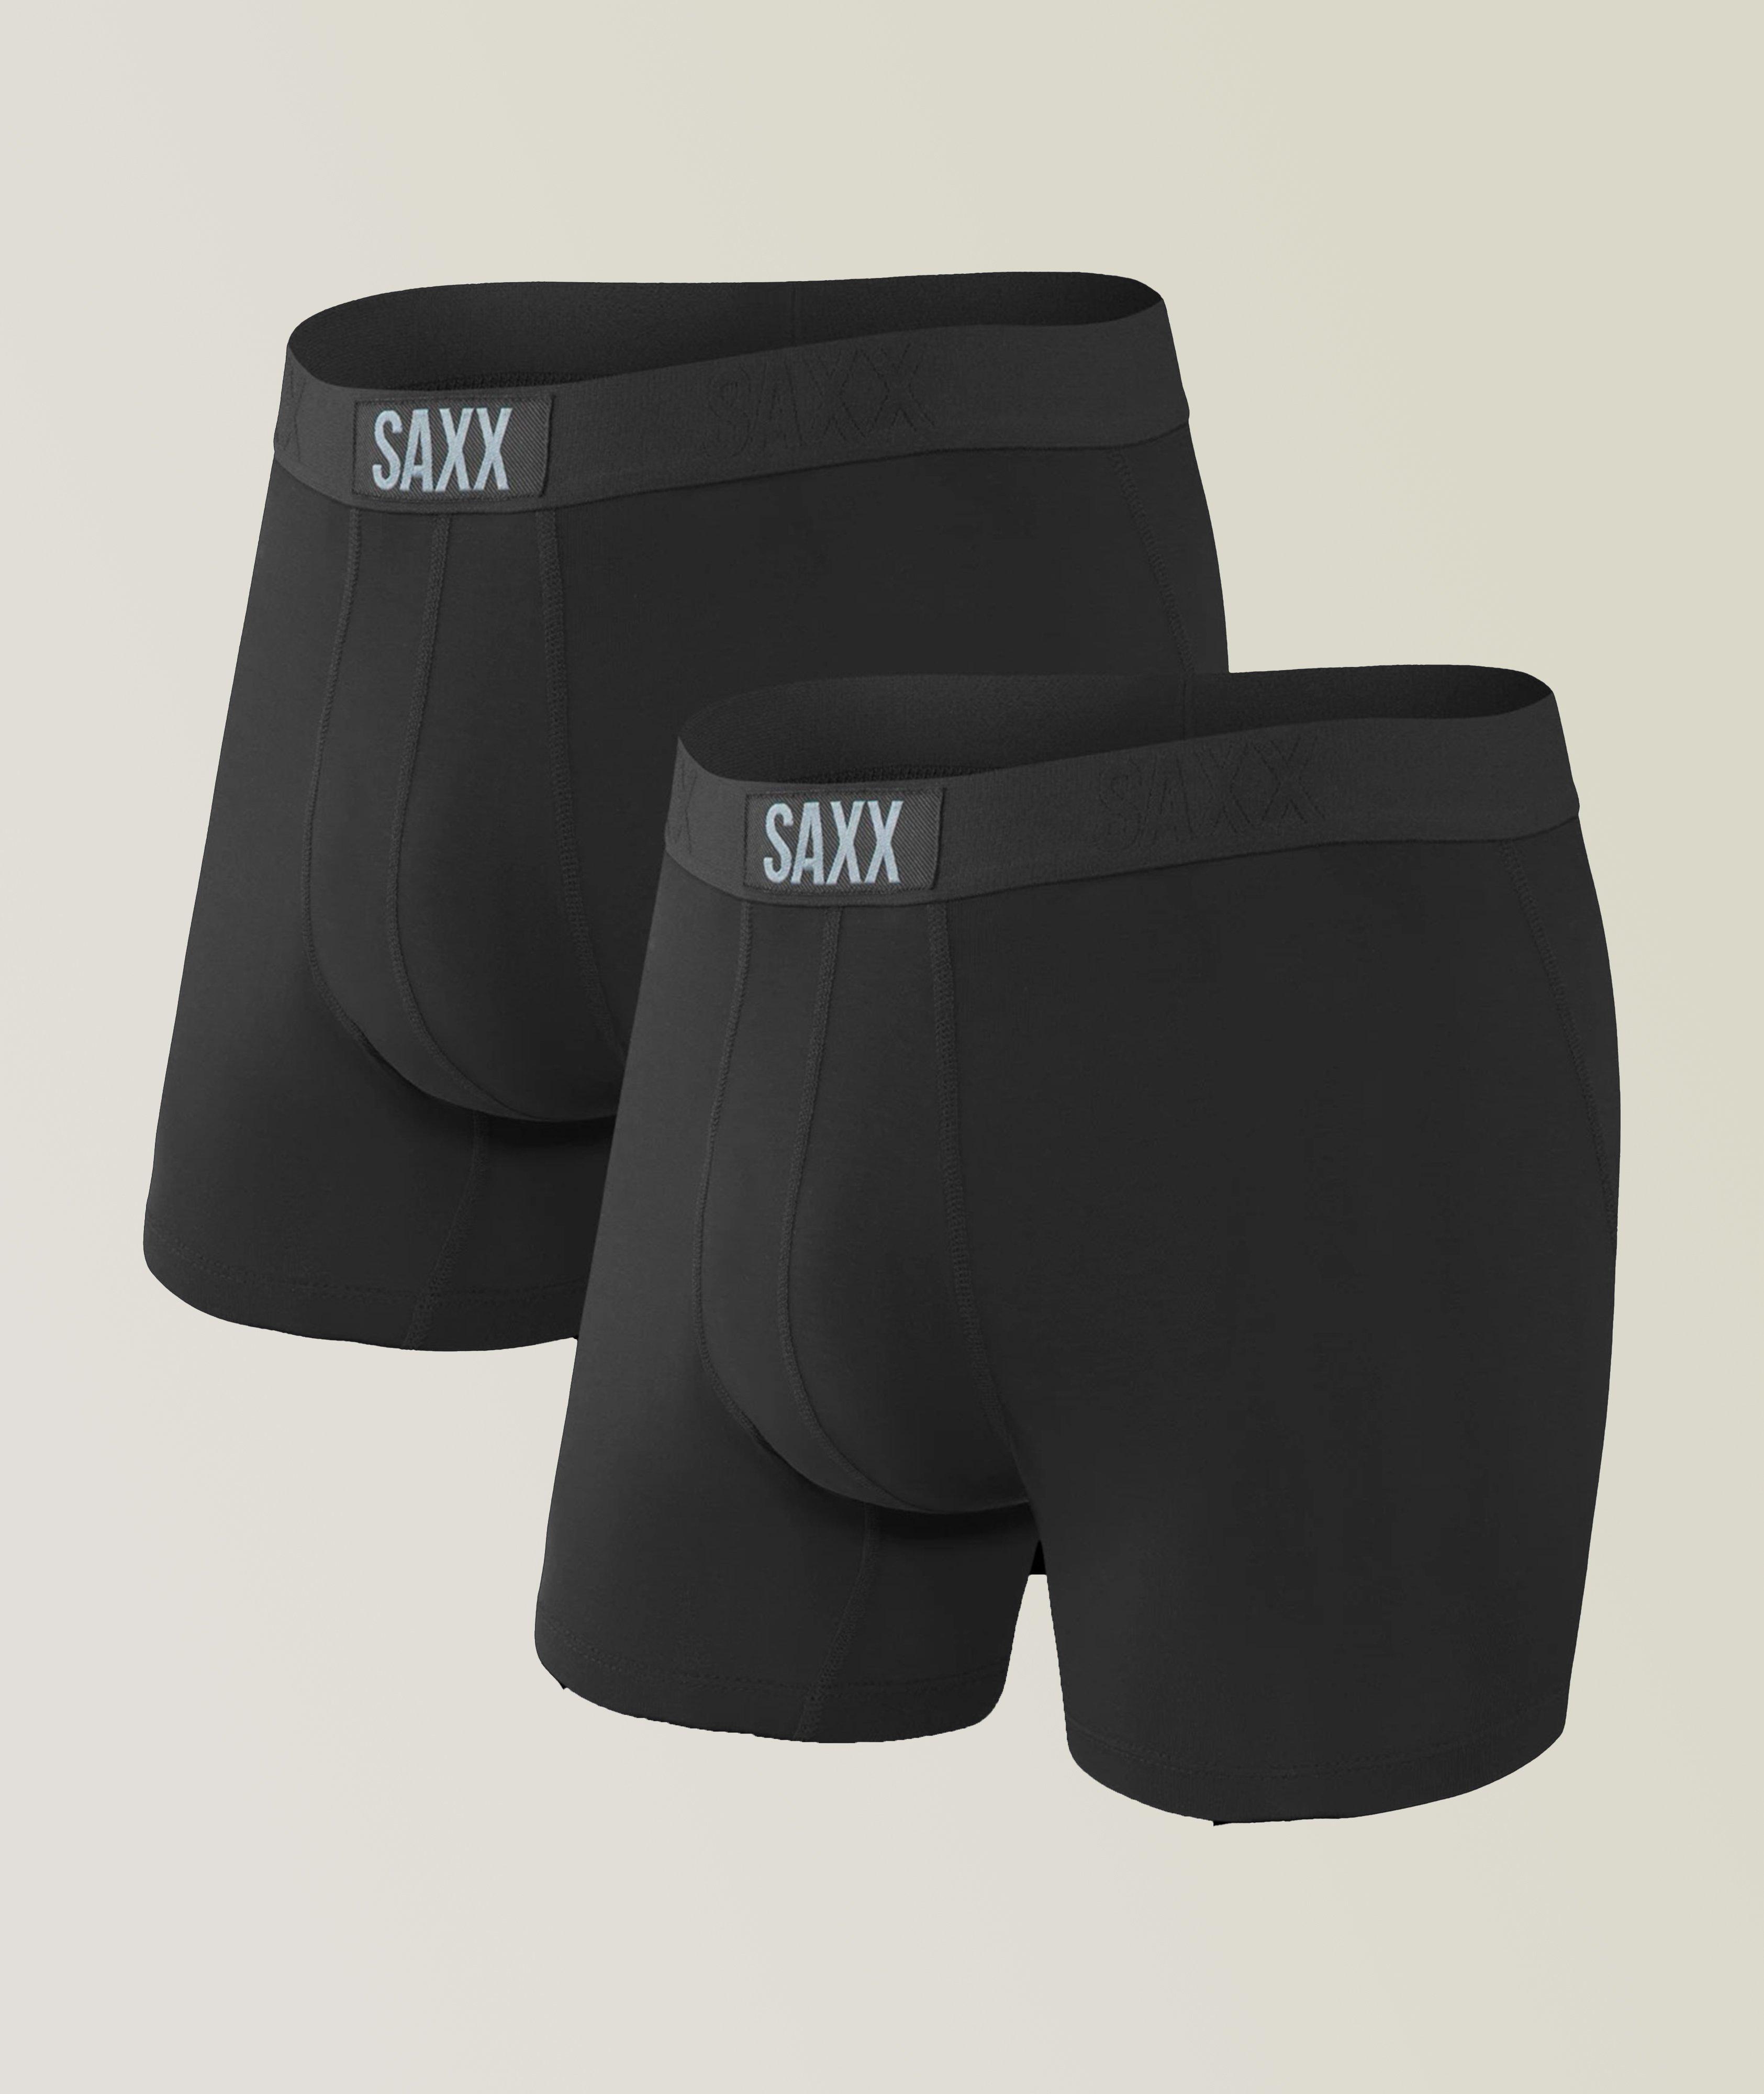 2-Pack Vibe Boxer Briefs image 0